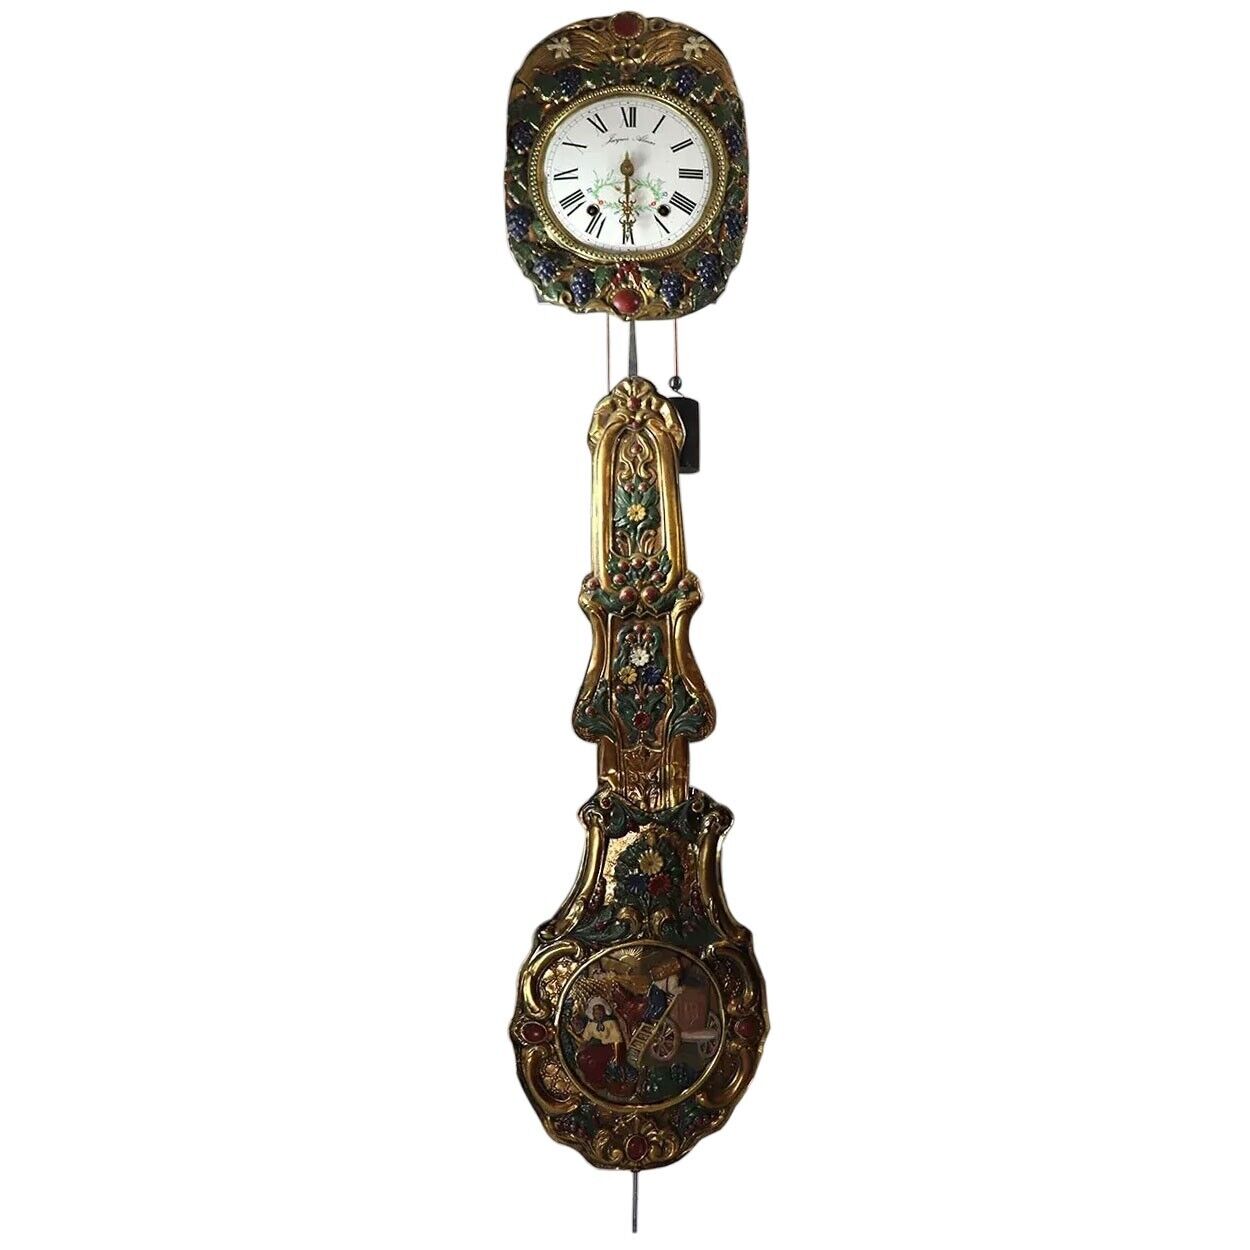 Antique French Jacques Almar Brass, Iron, Enamel Comtoise Wall Clock 19th cent.